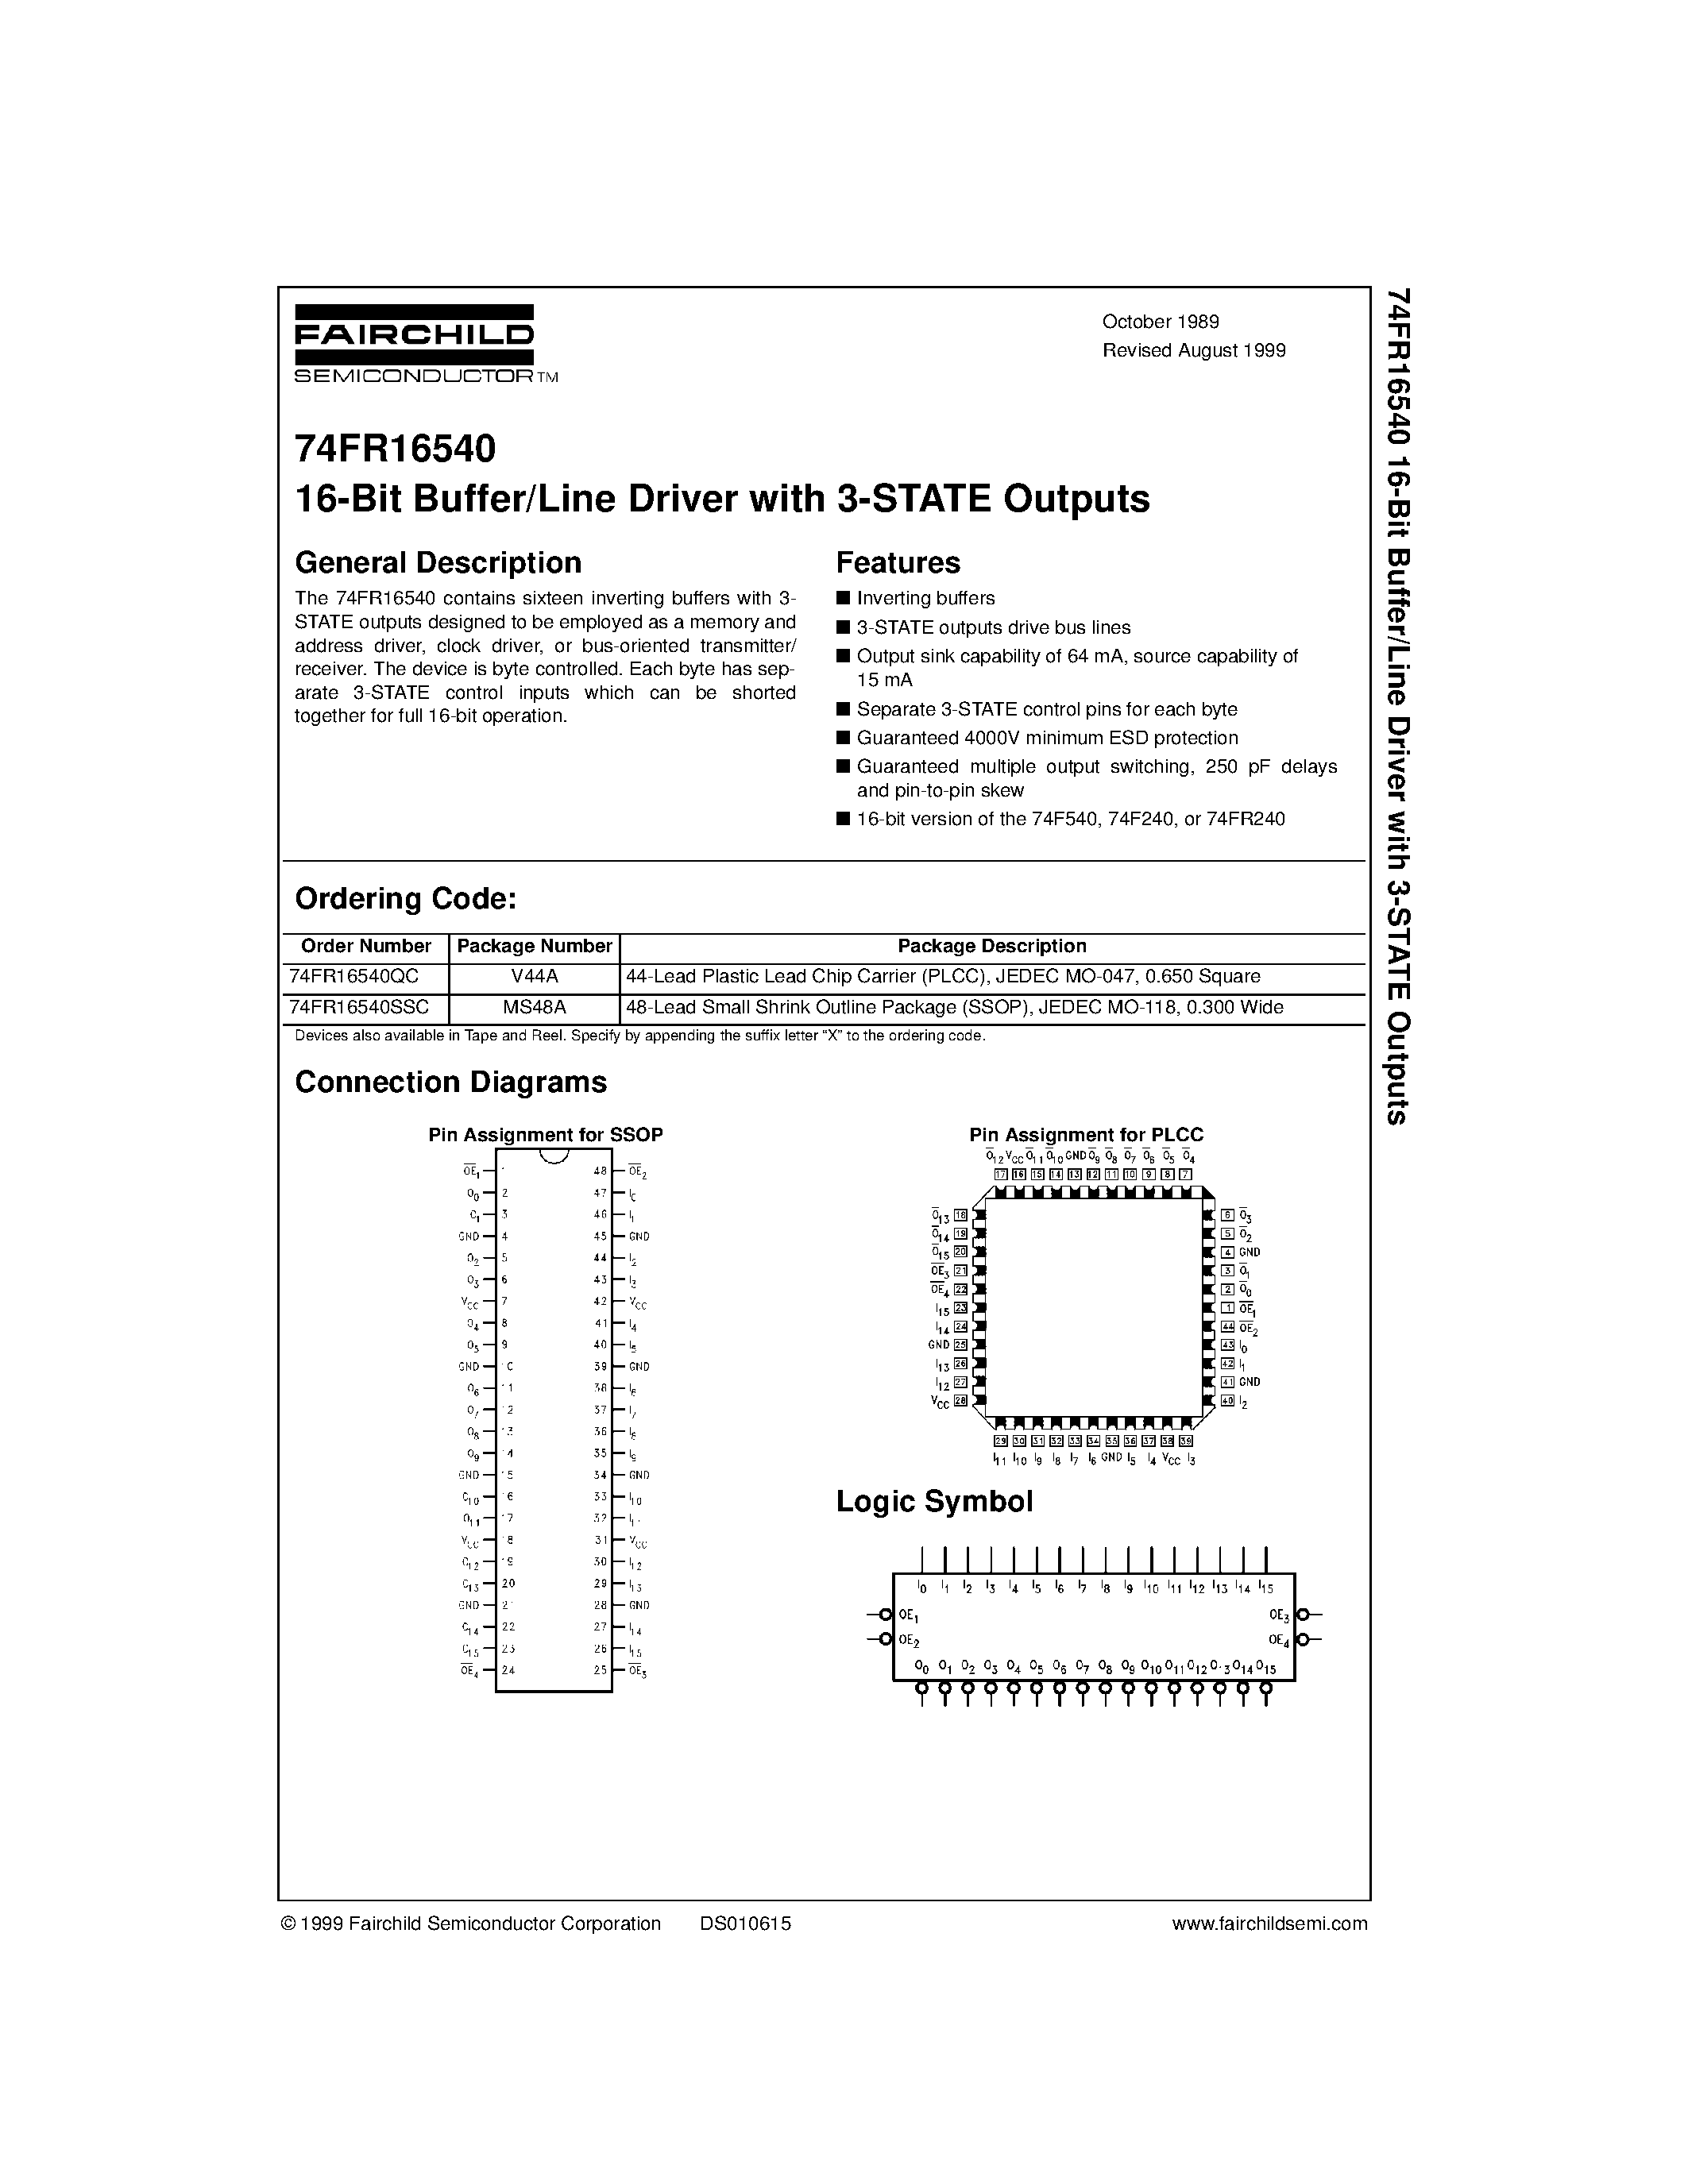 Datasheet 74FR16540 - 16-Bit Buffer/Line Driver with 3-STATE Outputs page 1